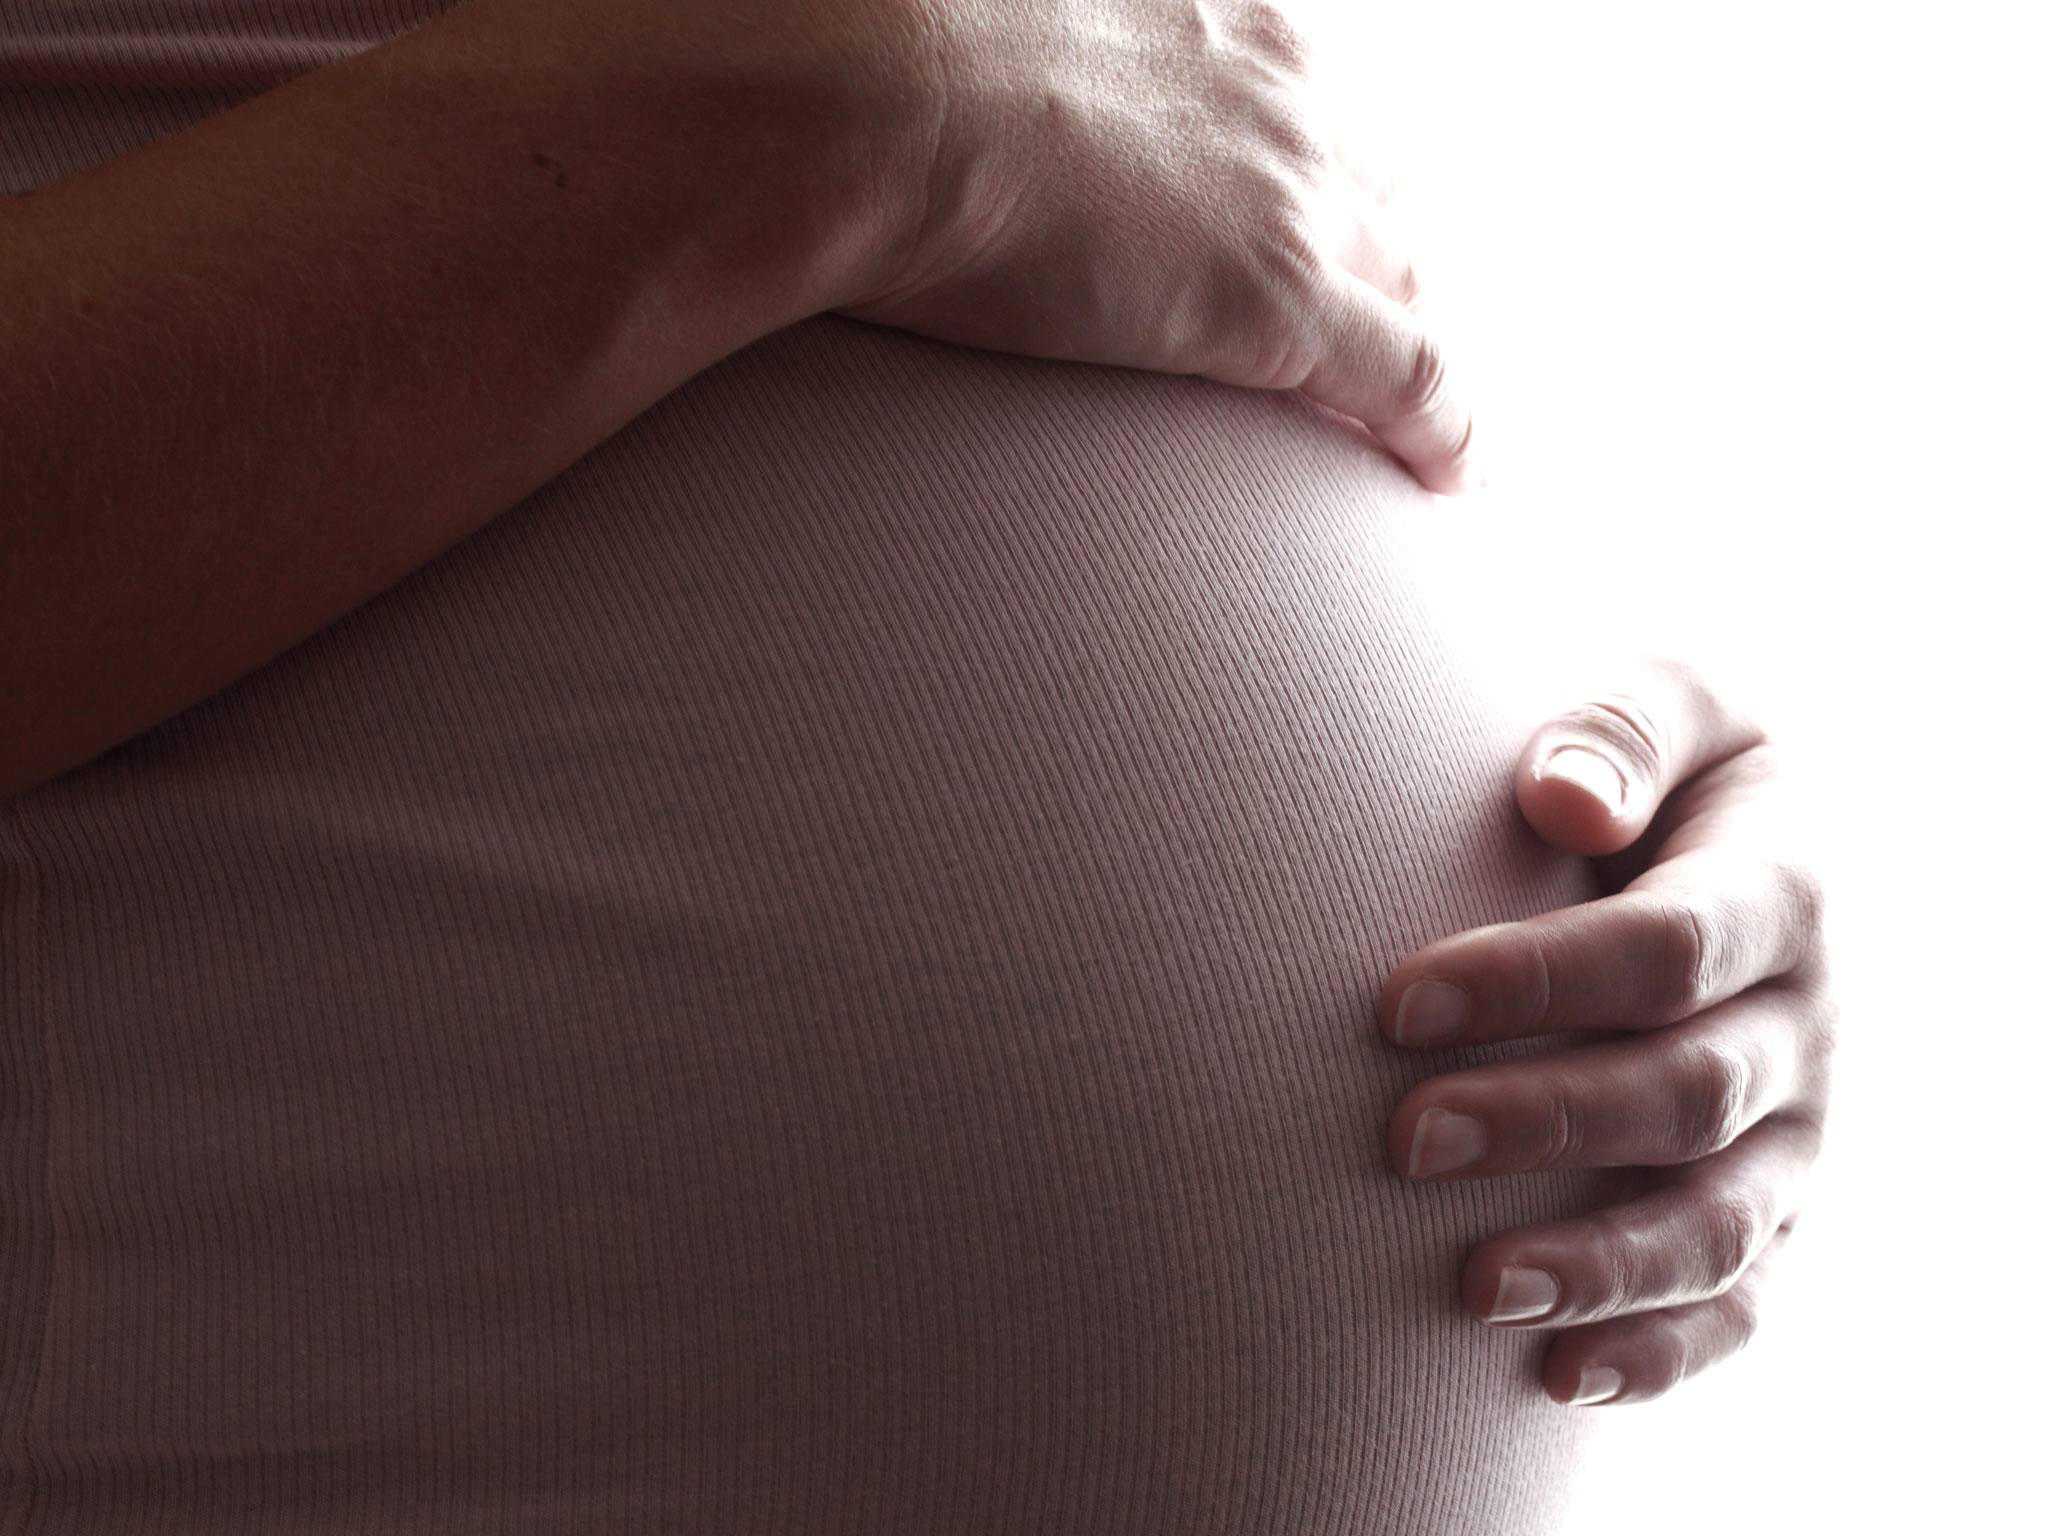 A pregnant woman has had her baby forcibly removed by caesarean section because she had suffered a mental breakdown.